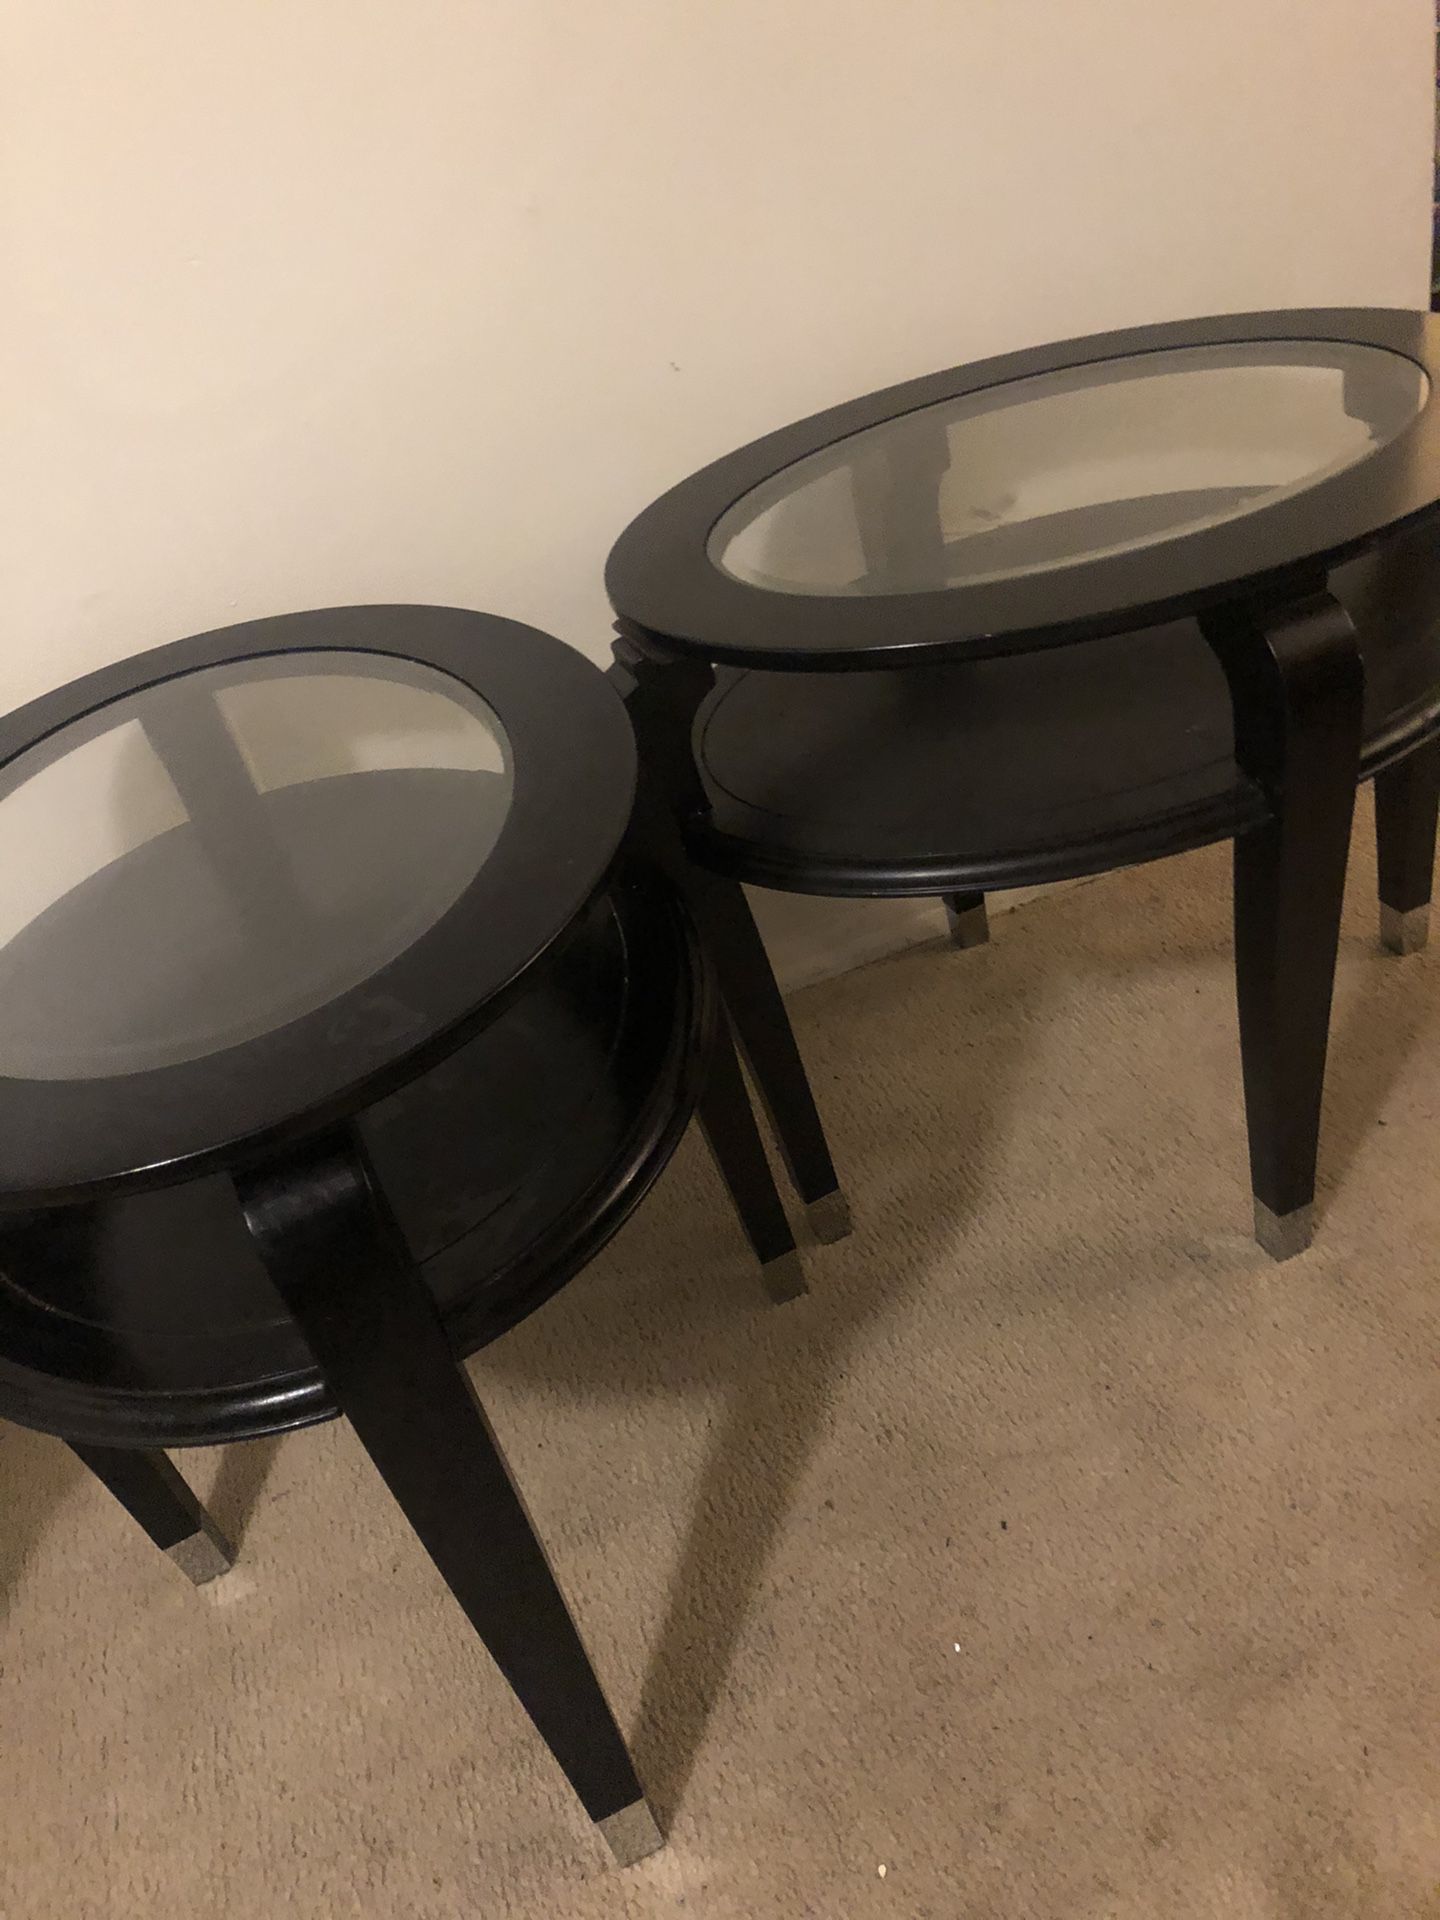 2 LIVING ROOM GLASS TOP TABLES. Send me offers and check my other listings